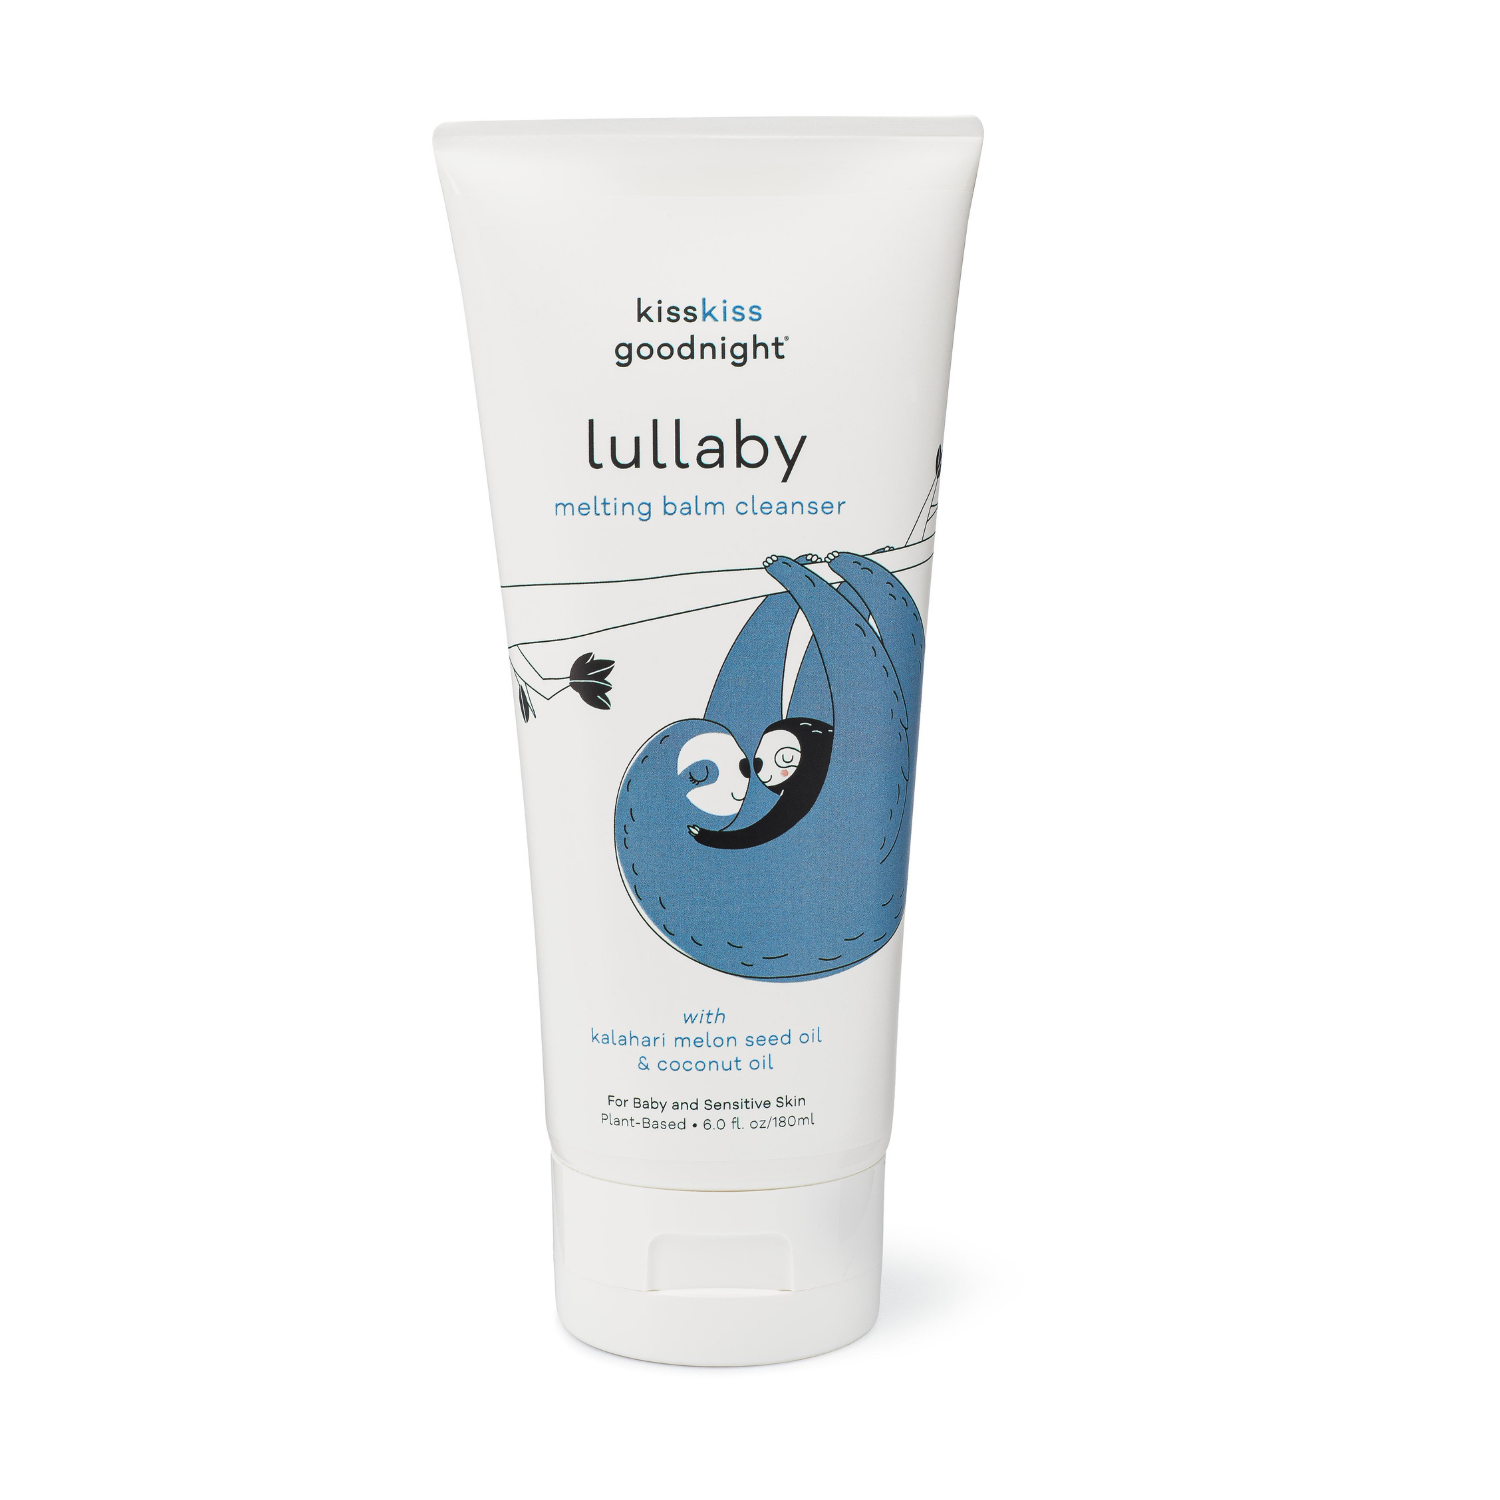 lullaby melting balm cleanser